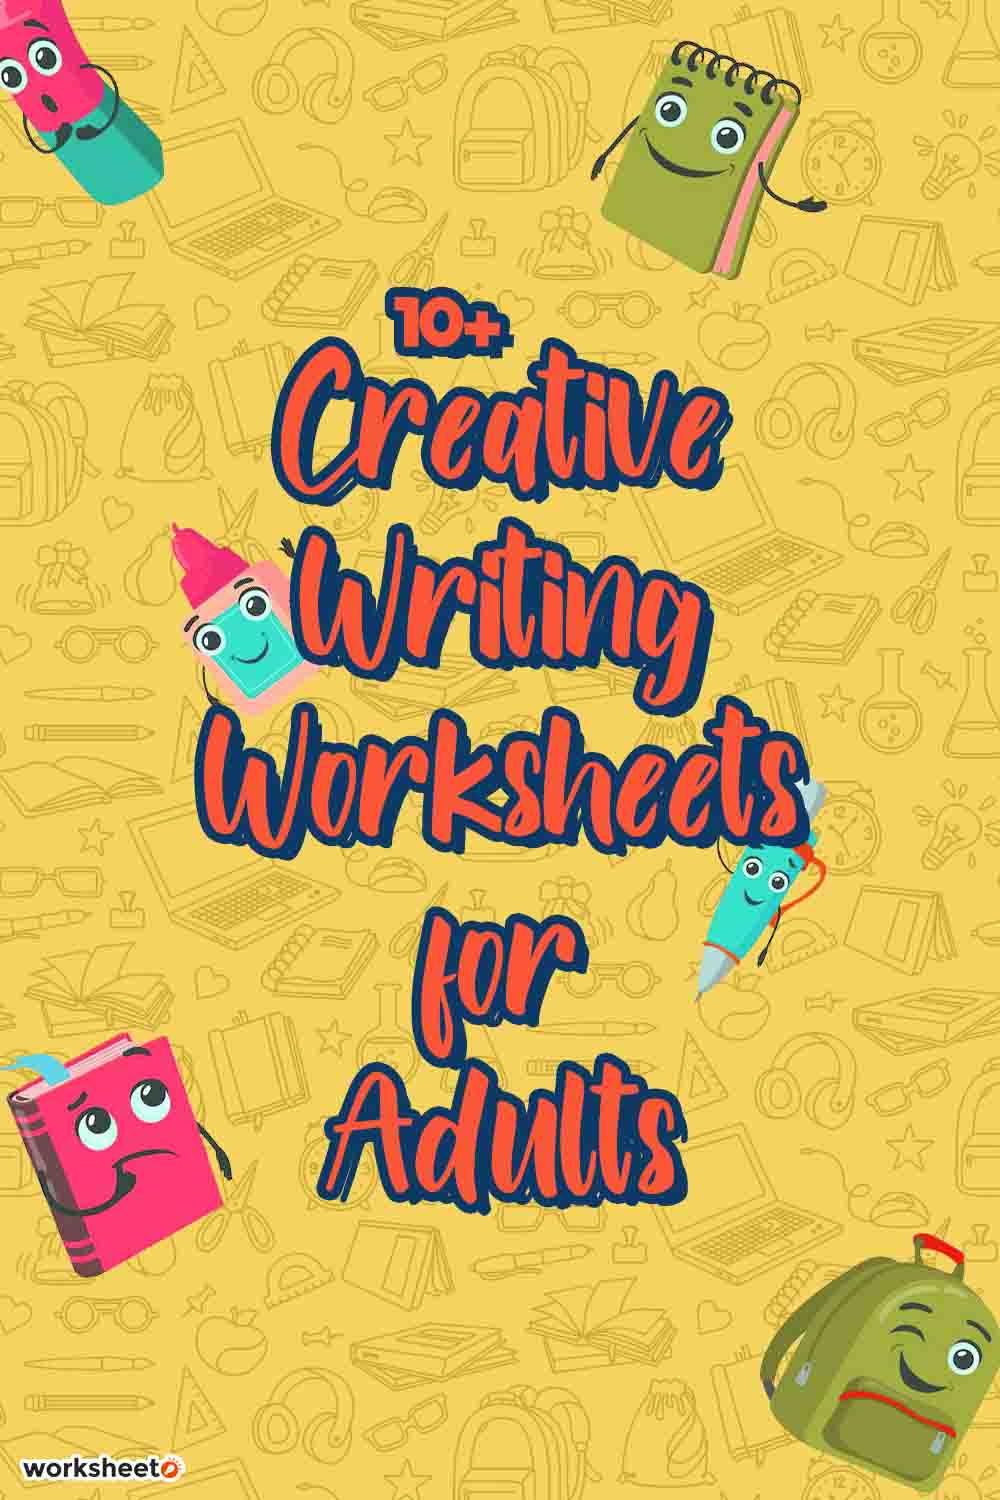 17 Images of Creative Writing Worksheets For Adults